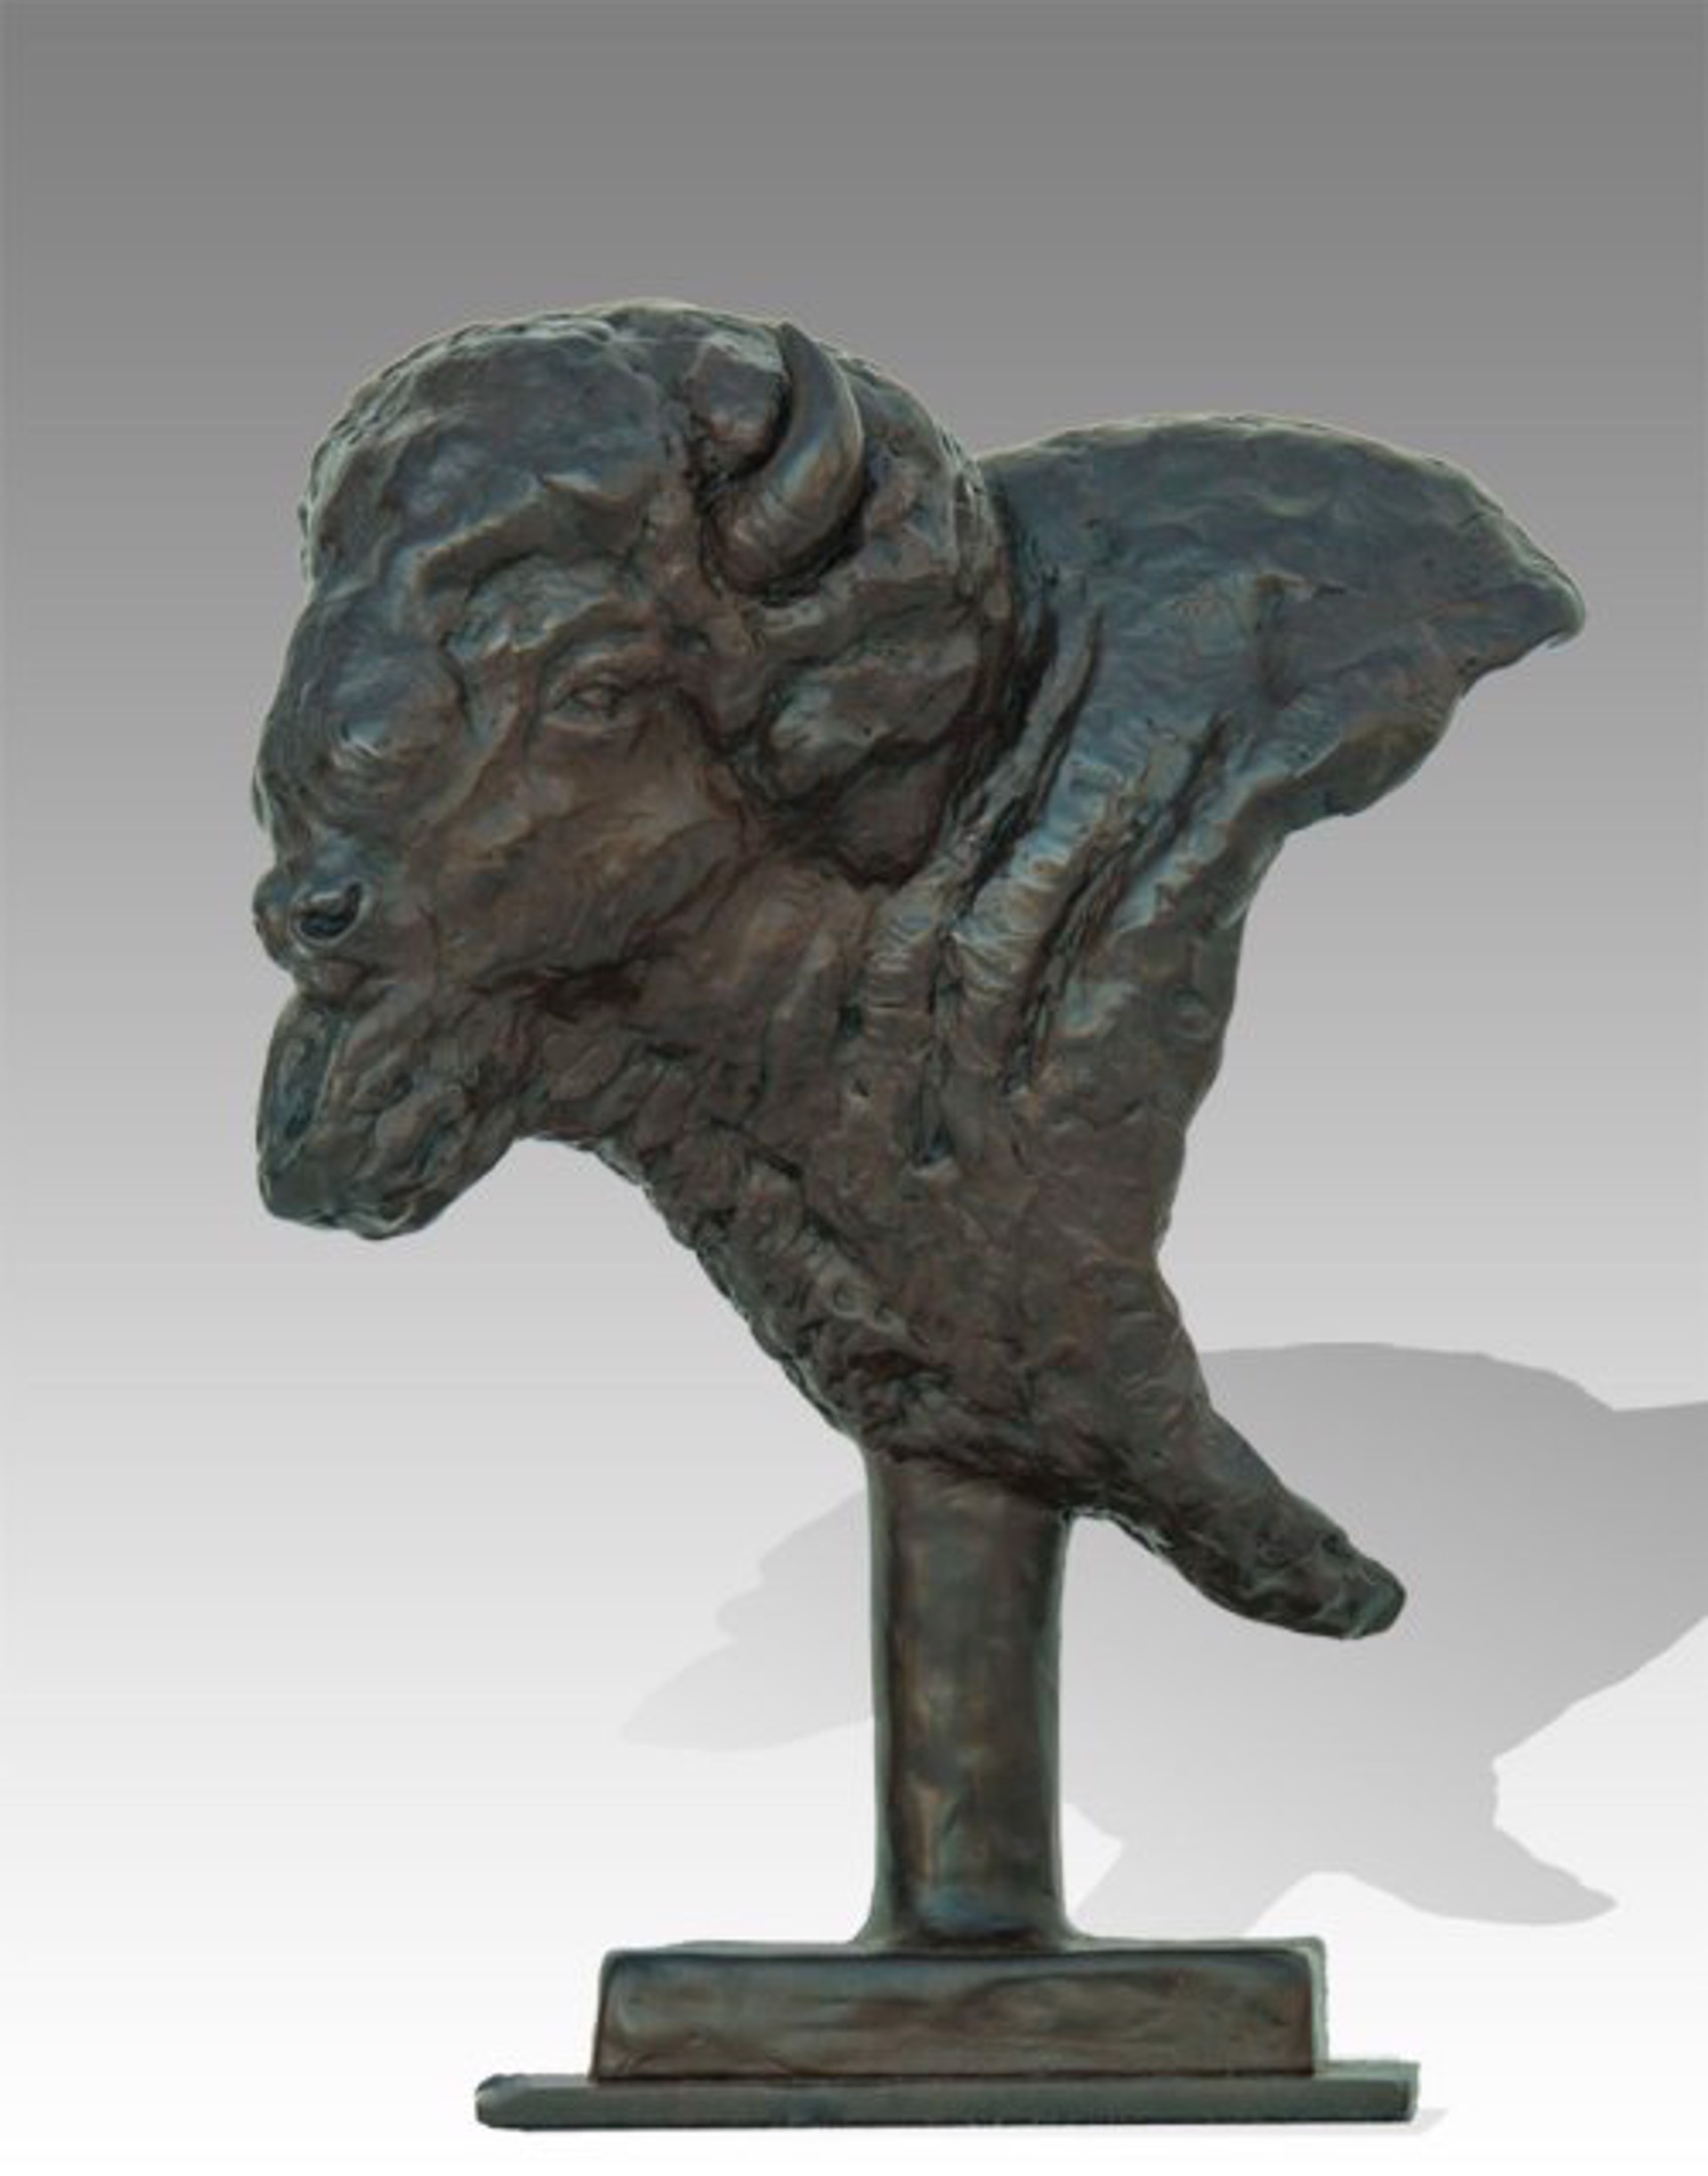 Bison Bust by Mike Barlow